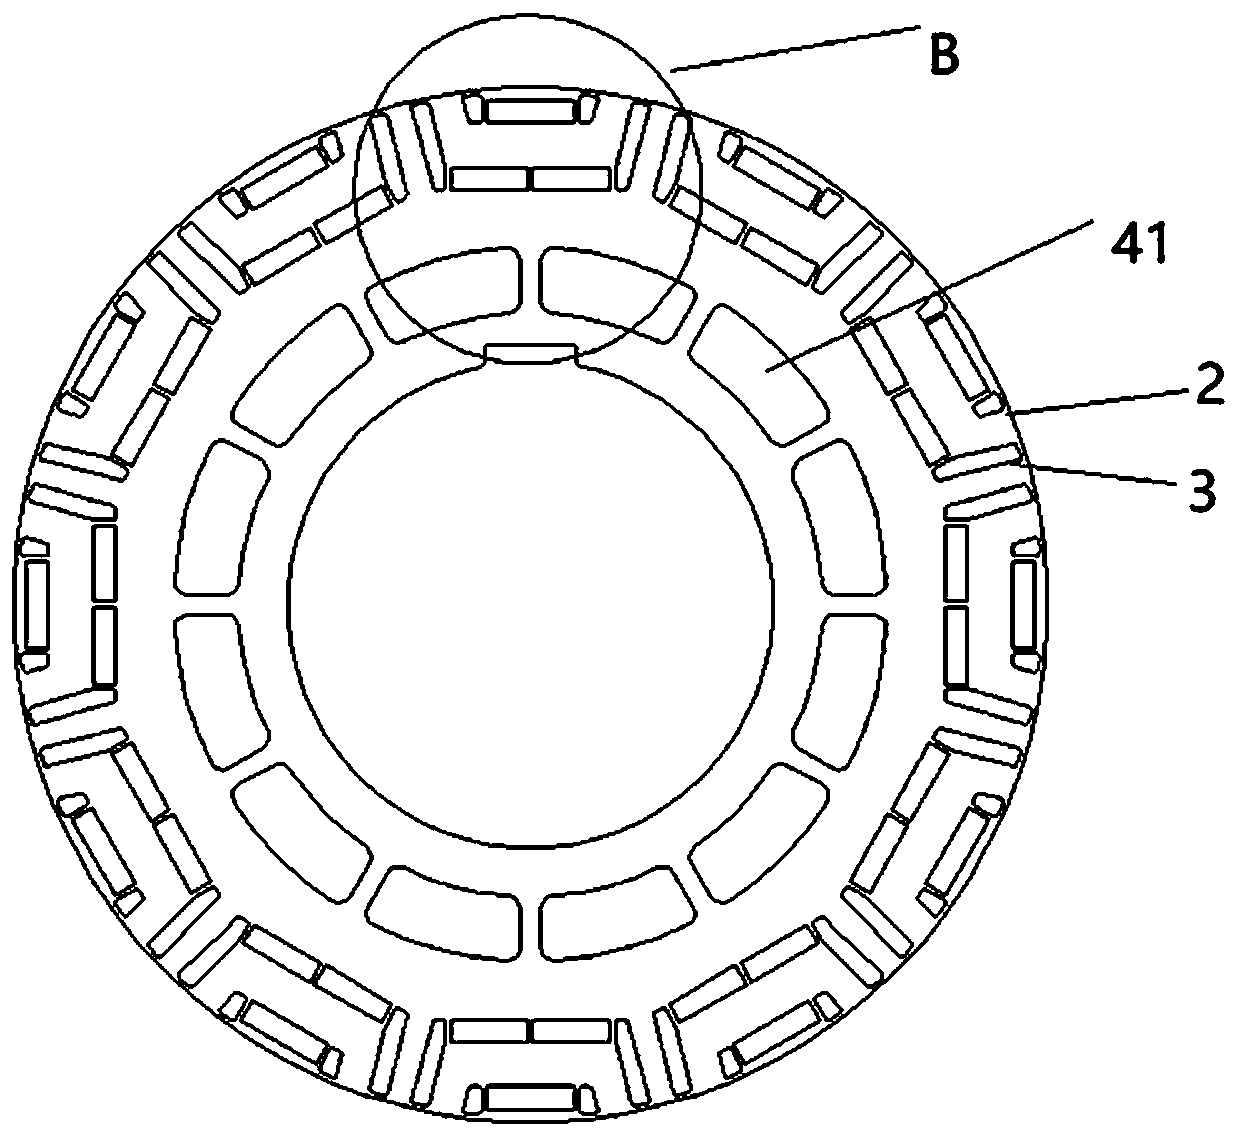 Rotor for synchronous reluctance motor